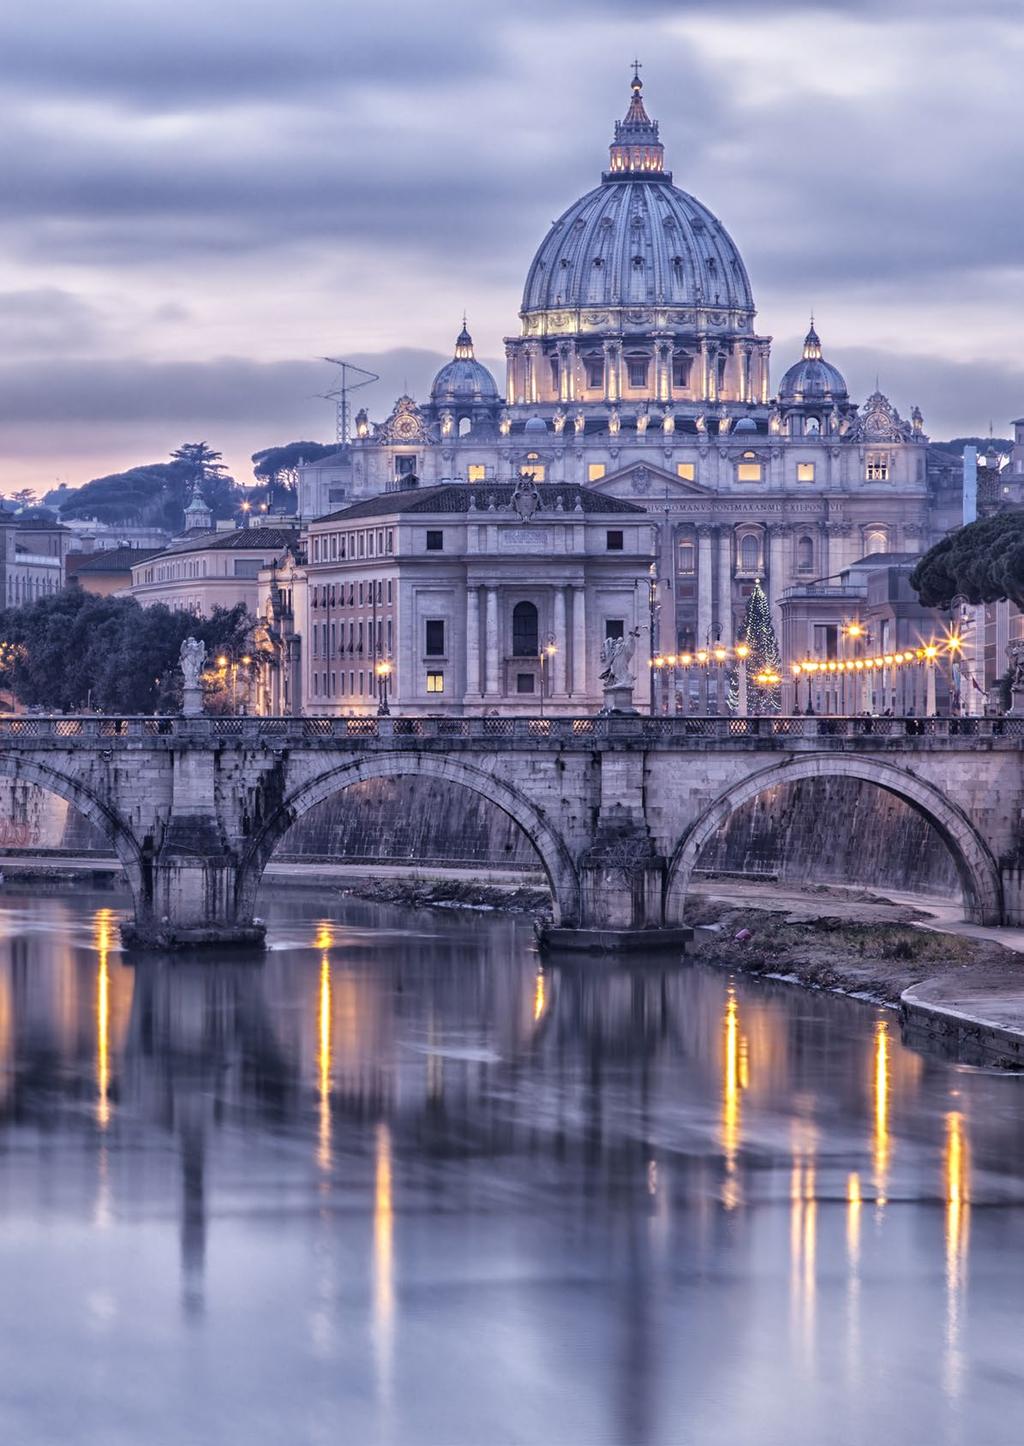 WELCOME TO ROME SCHEDULE AT A GLANCE 26 February 10:00 17:00 Pre-filled Syringes Interest Group Meeting 26 February 13:00 18:00 Packaging Science Interest Group Meeting 27 February 9:00 18:30